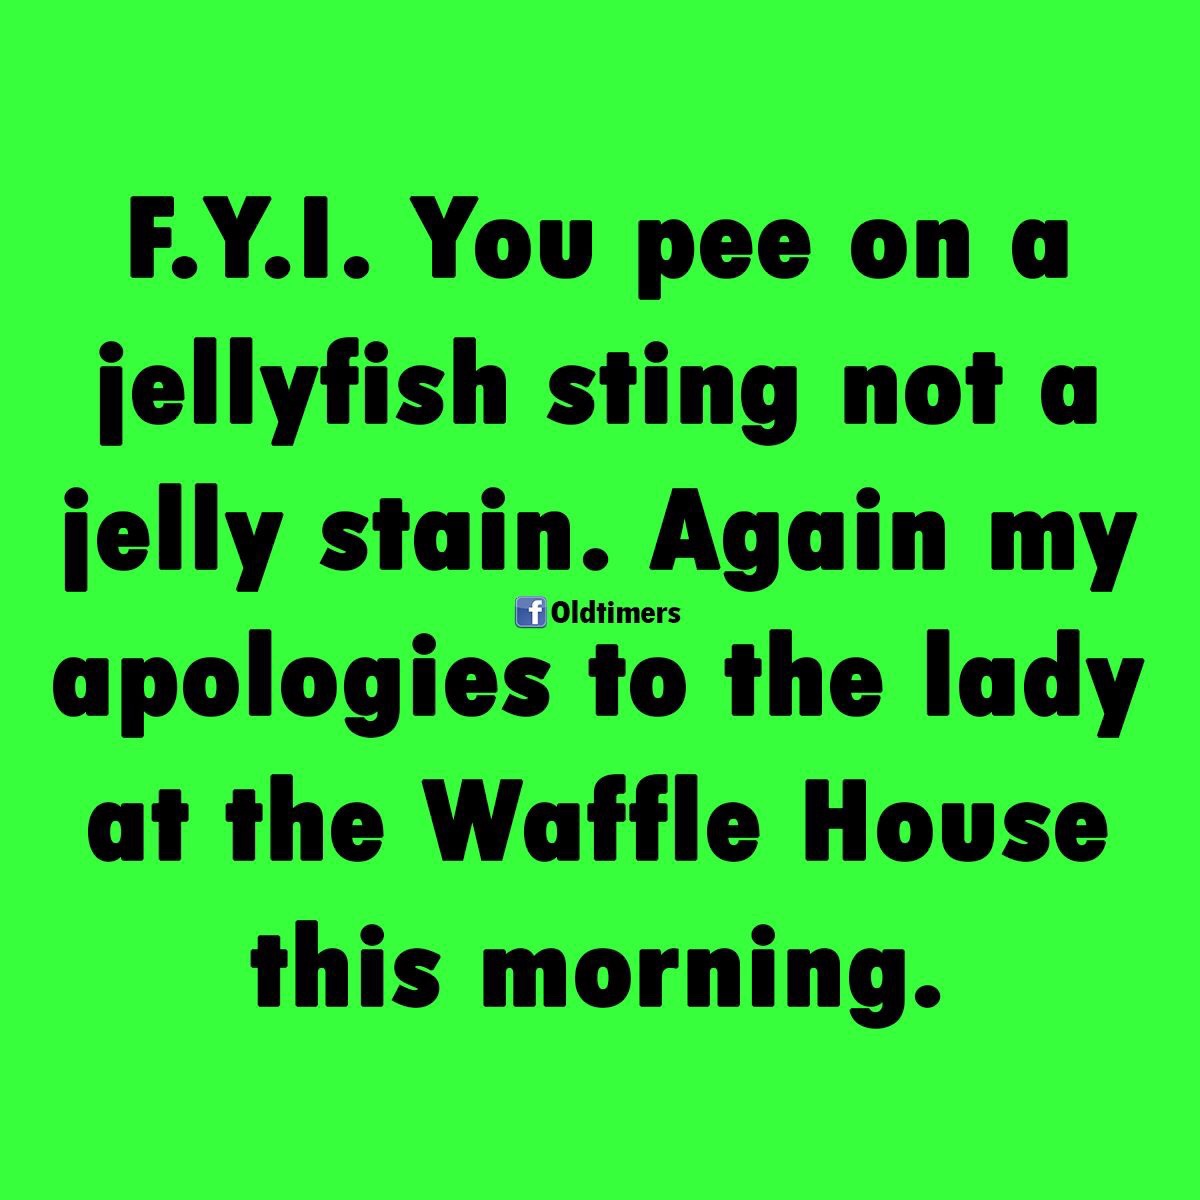 grass - F.Y.T. You pee on a jellyfish sting not a jelly stain. Again my apologies to the lady at the Waffle House this morning. f Oldtimers